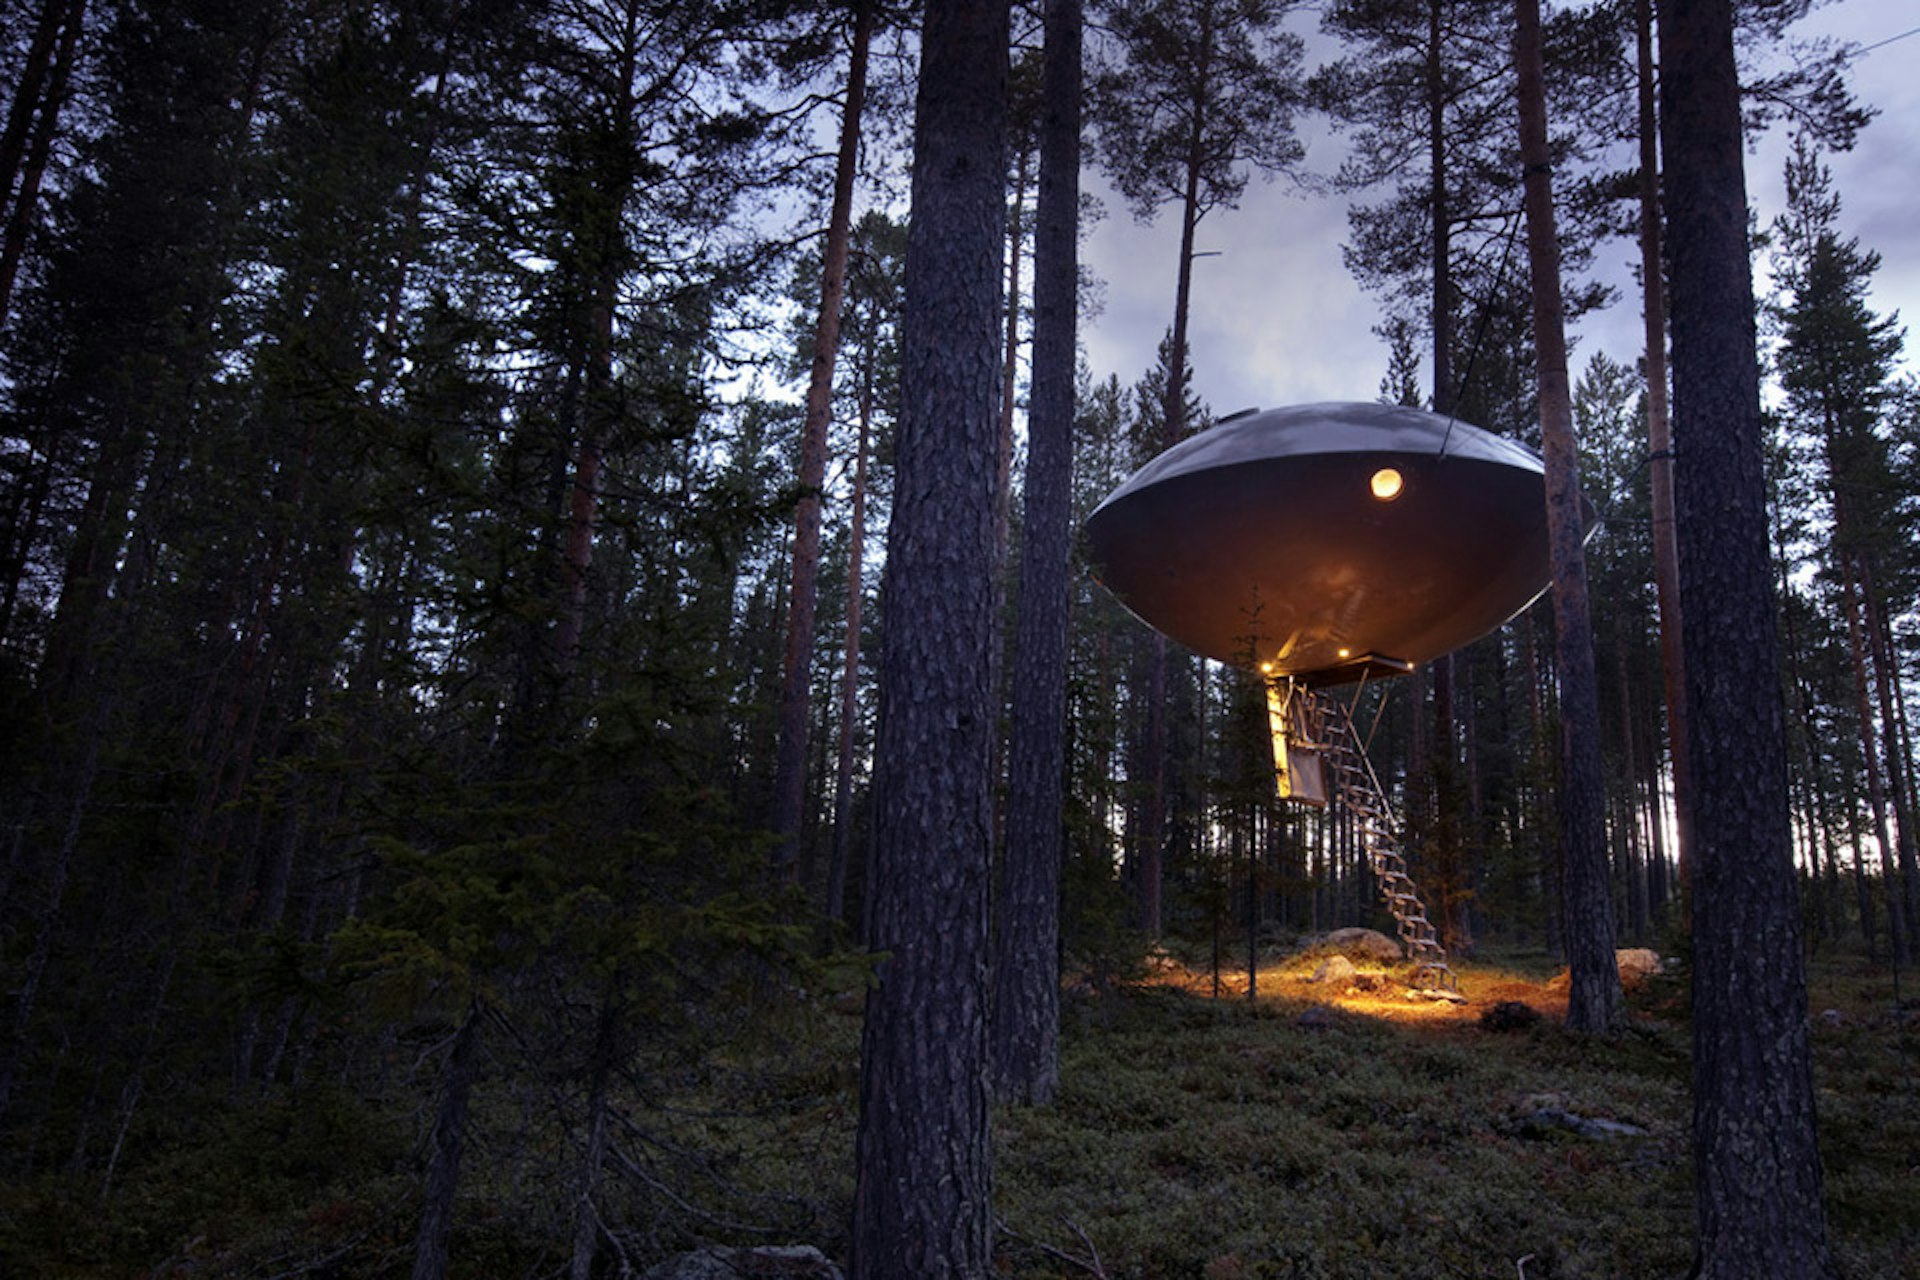 Exterior shot of a metal dish suspended between trees with a ladder descending to the ground